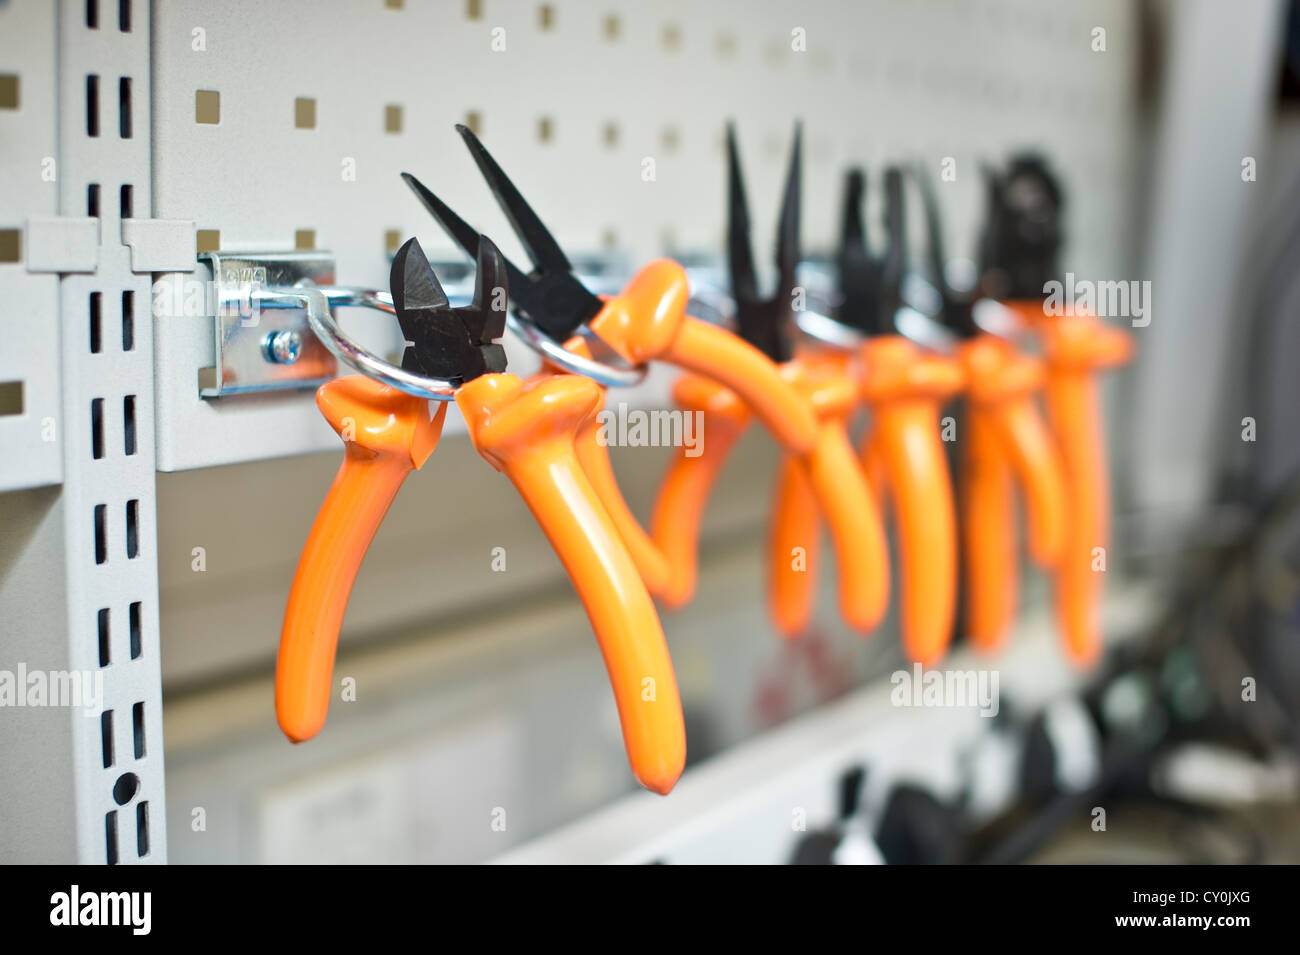 A series of insulated orange pliers on a rack. Stock Photo